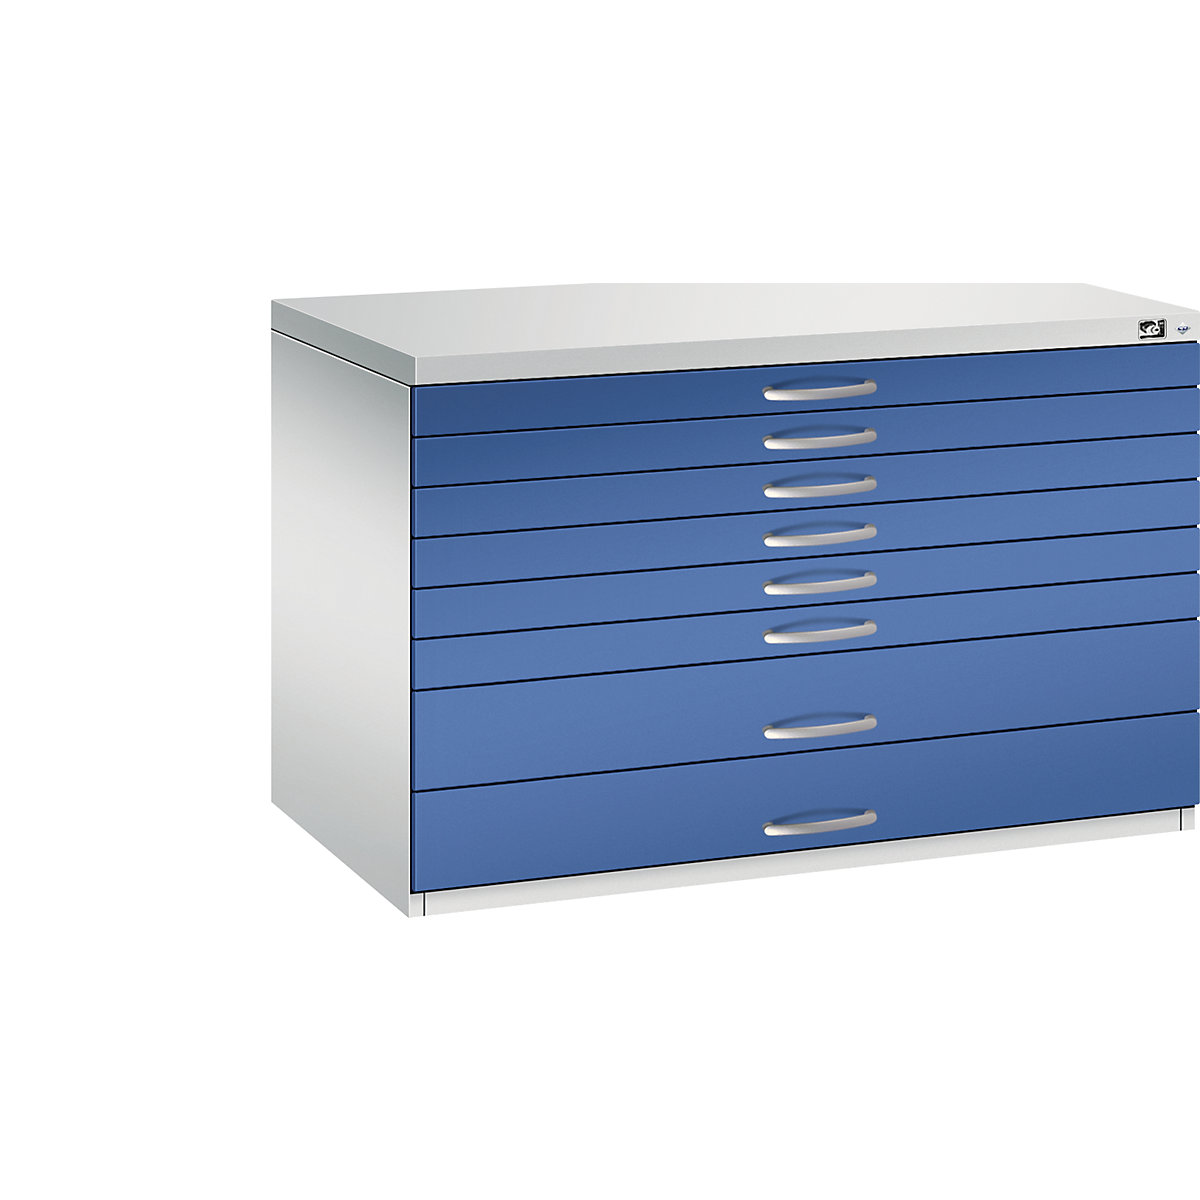 Drawing cabinet – C+P, A1, 8 drawers, height 760 mm, light grey / gentian blue-10